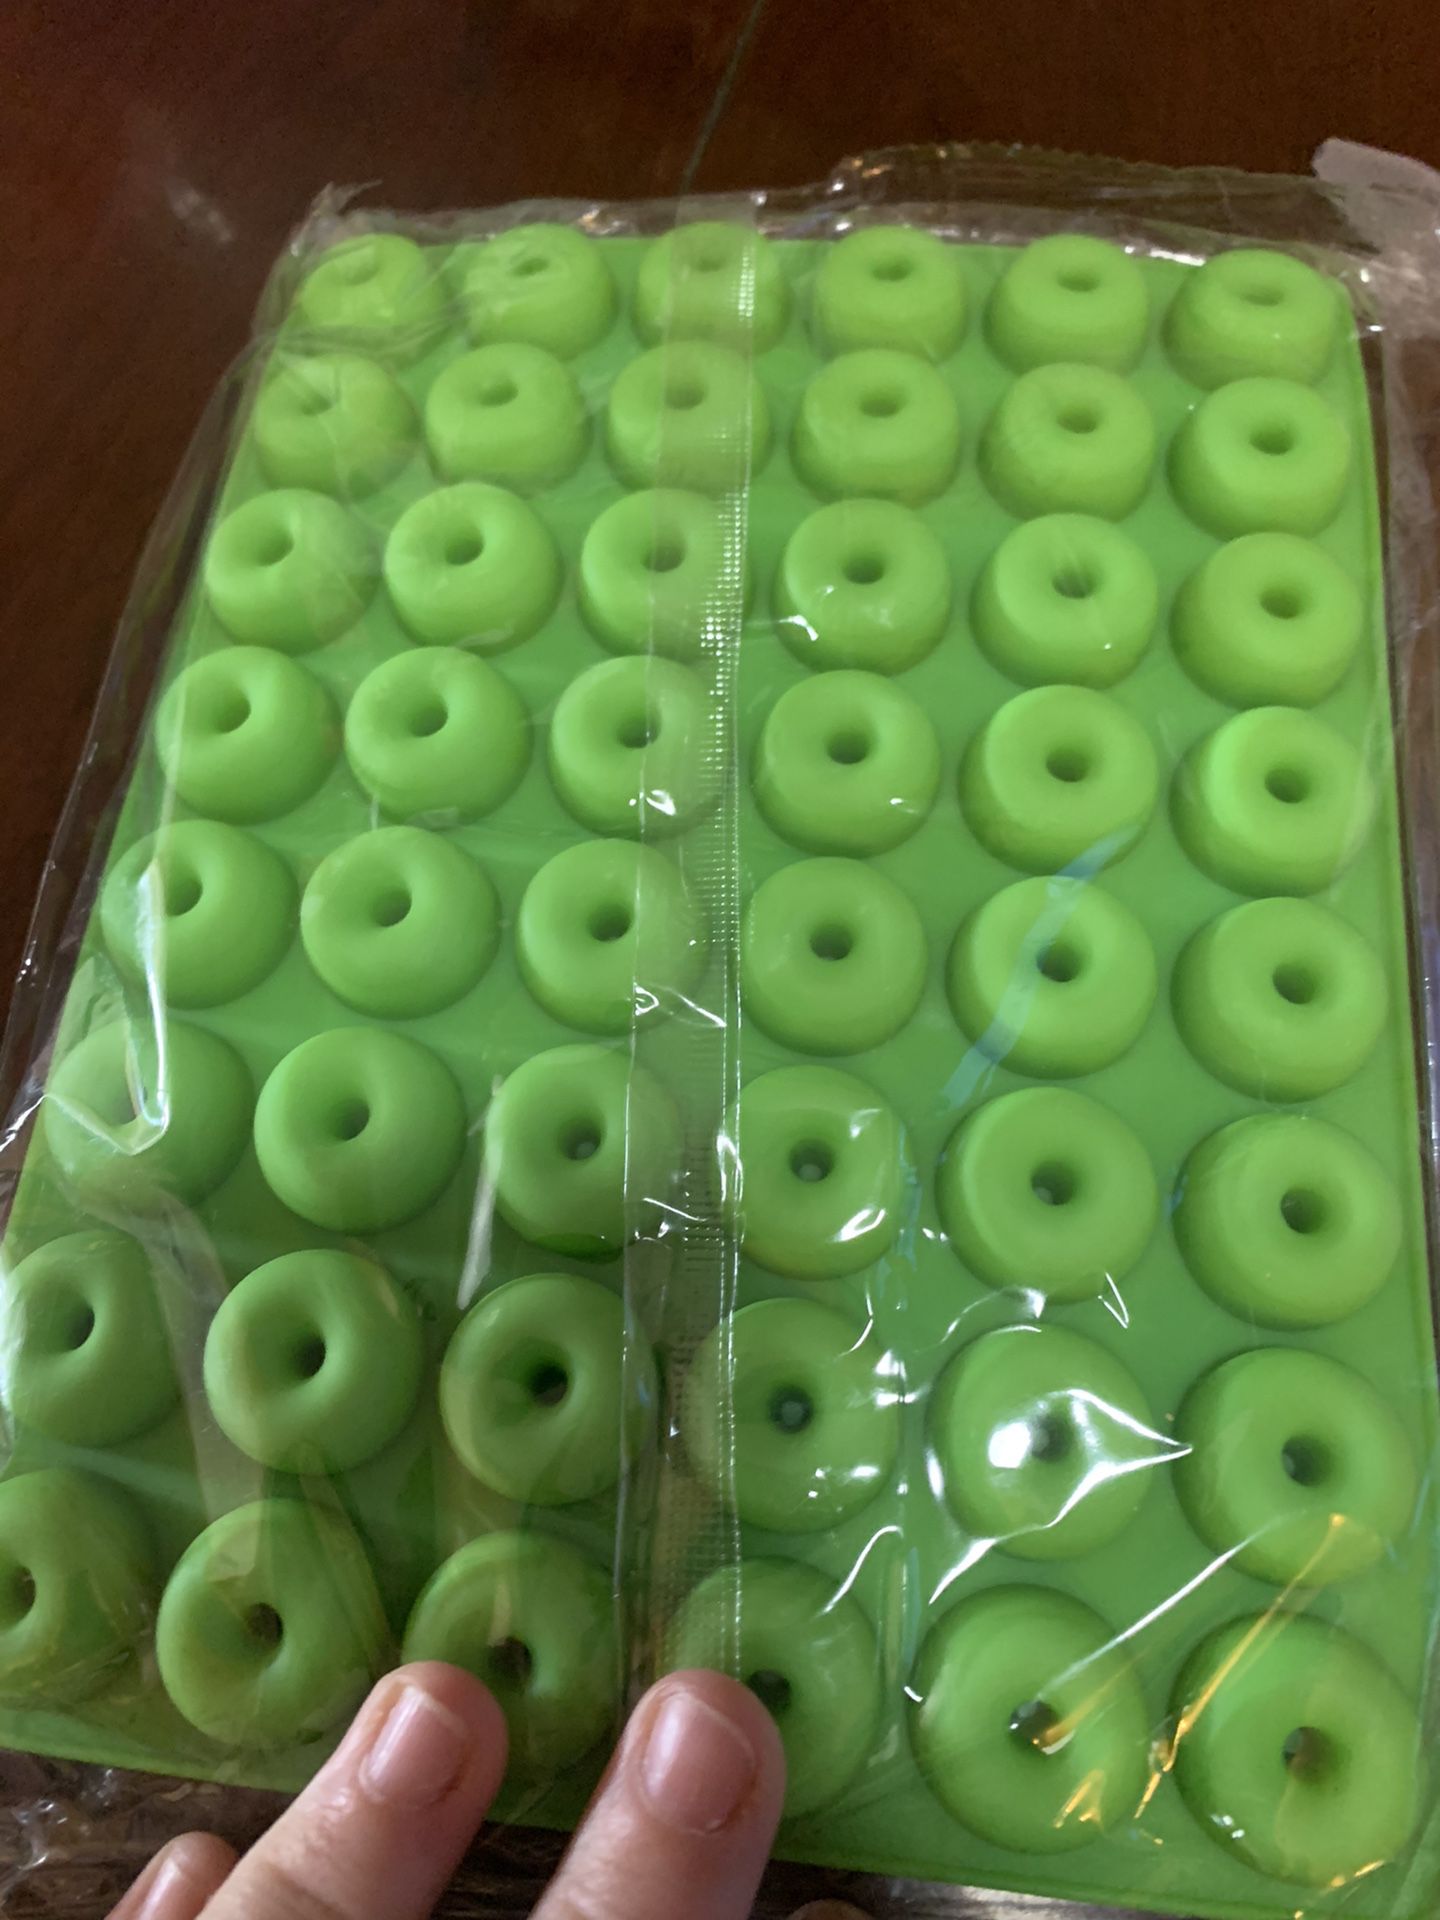 3-donut silicone mold with droppers